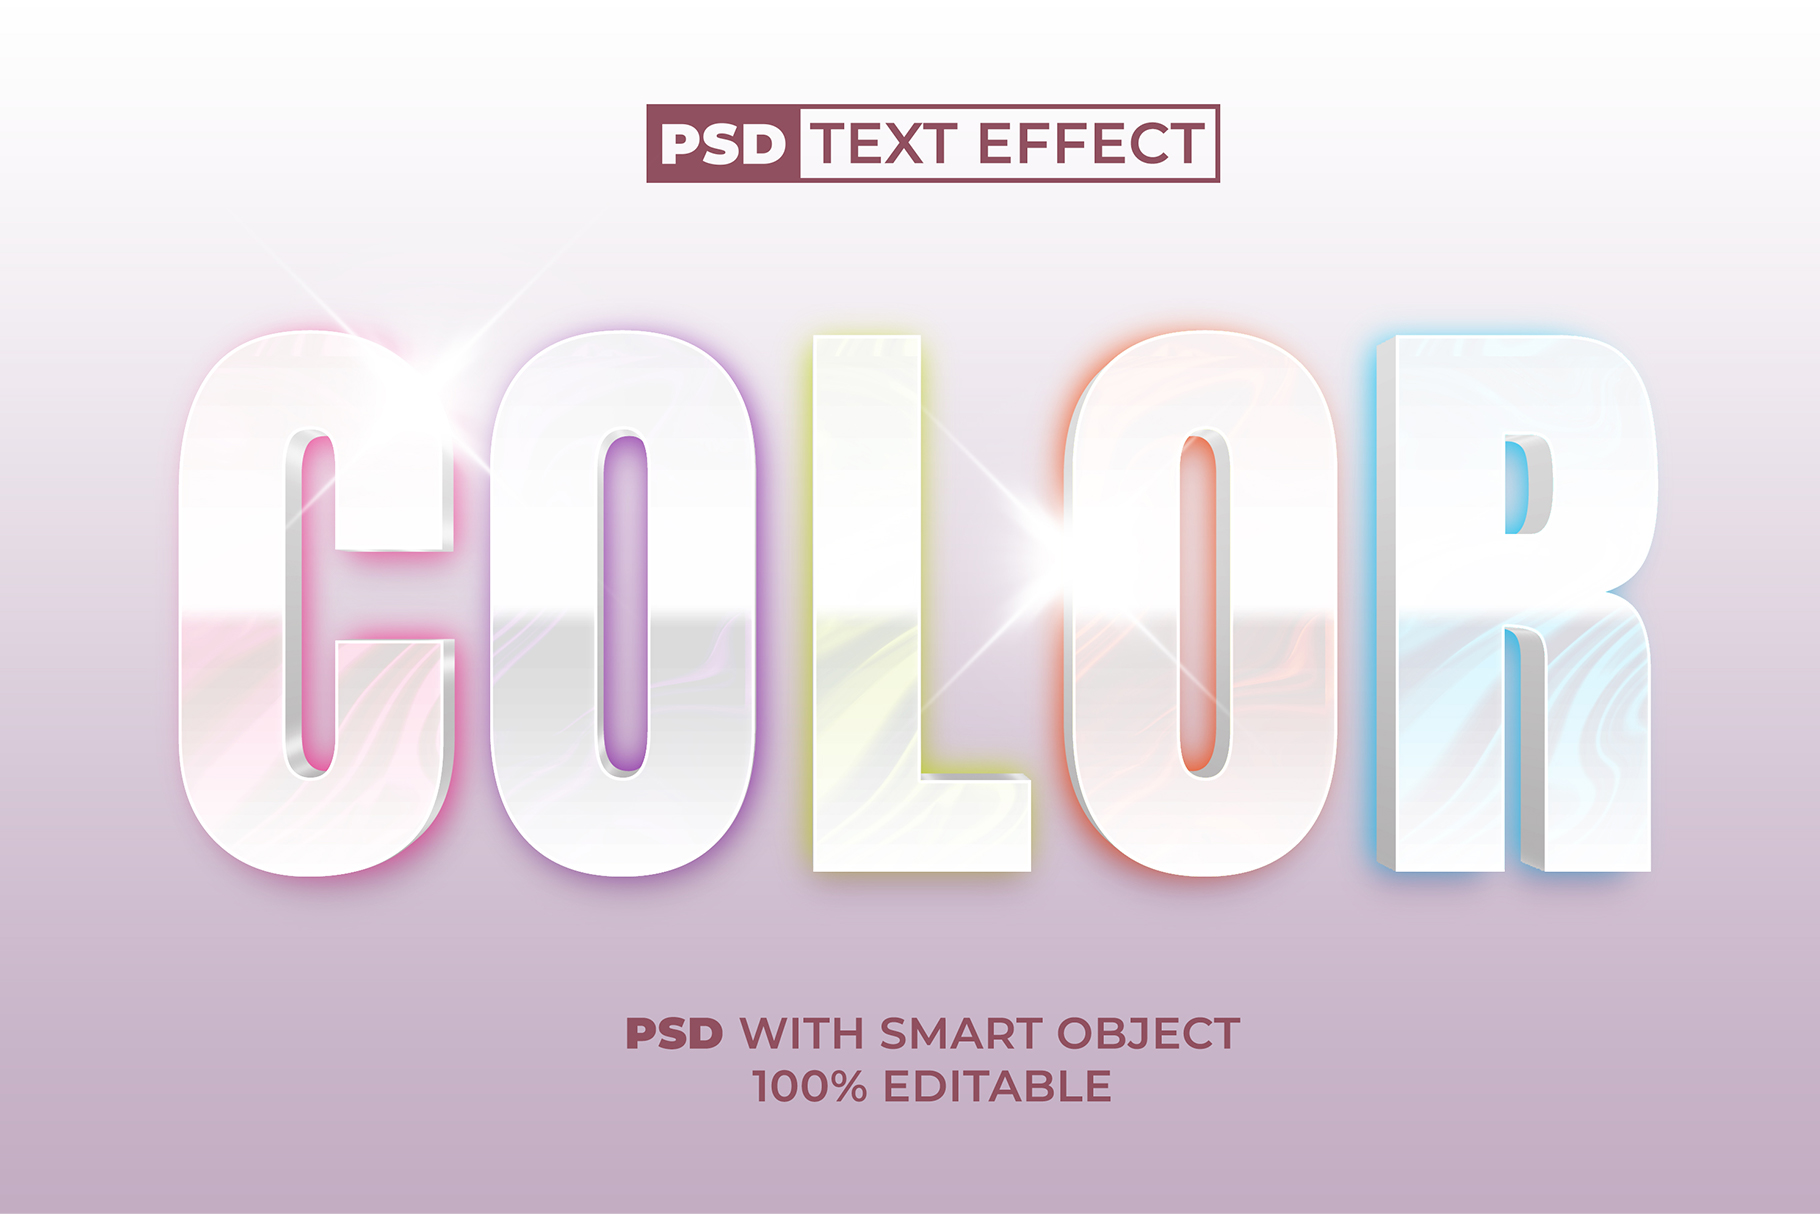 The text color with smart object in the middle.